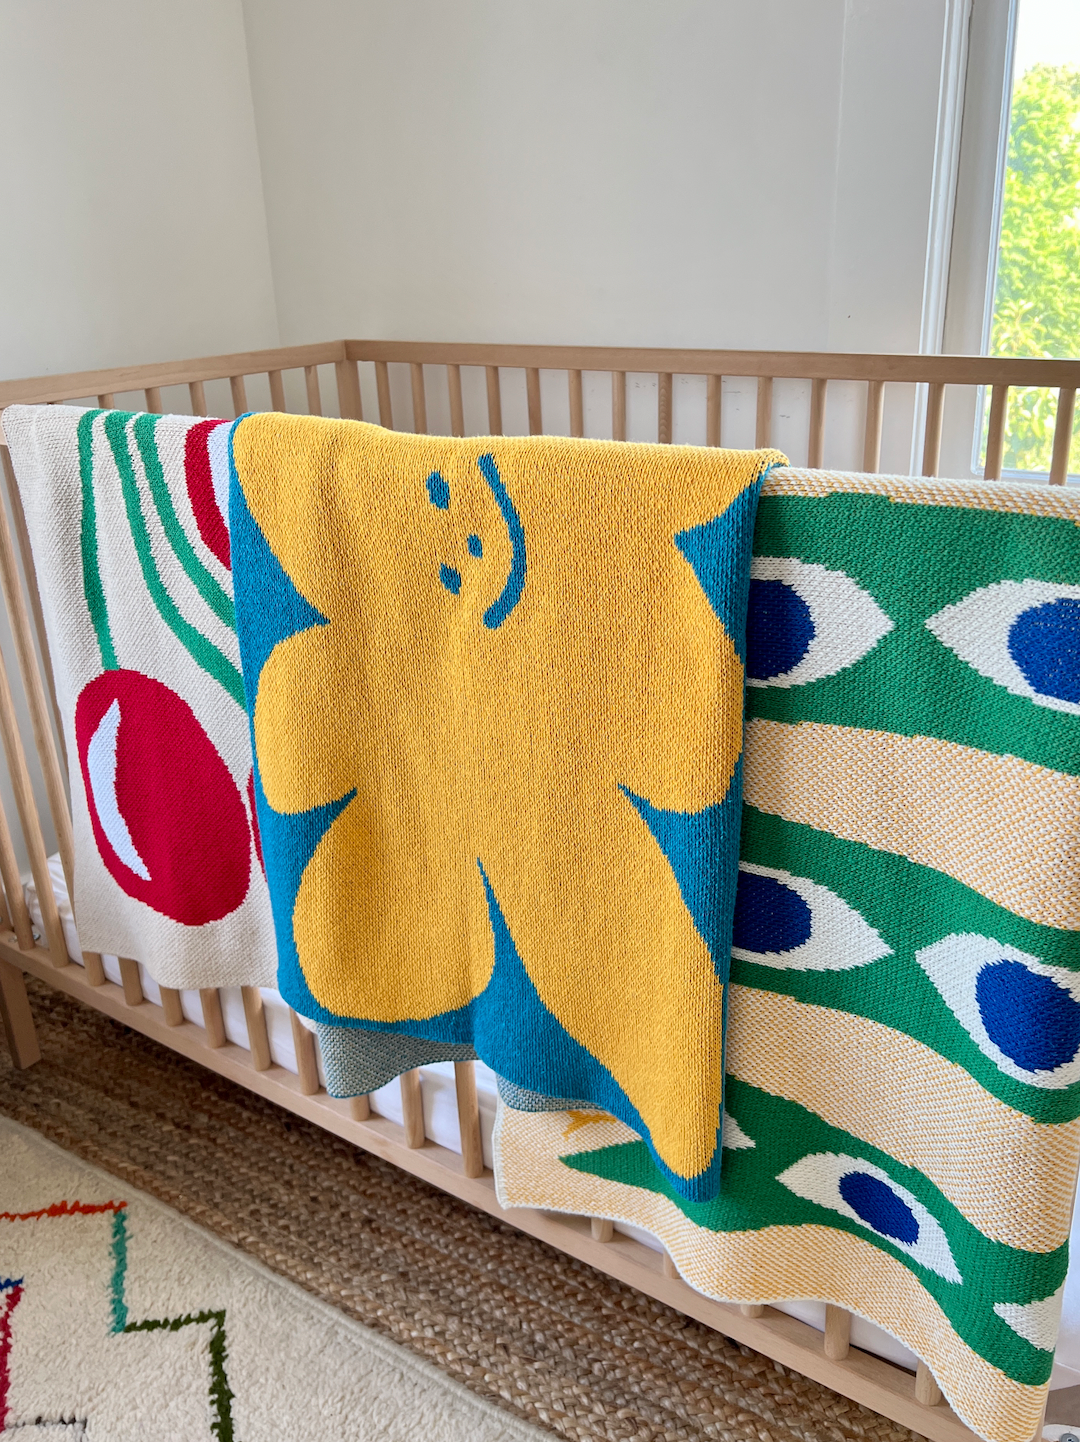 Three mini blankets folded over the side of a cot: one in a red cherry design, one with yellow and gray smiley shapes on a sky blue background, one with a green snake curling down an ecru background